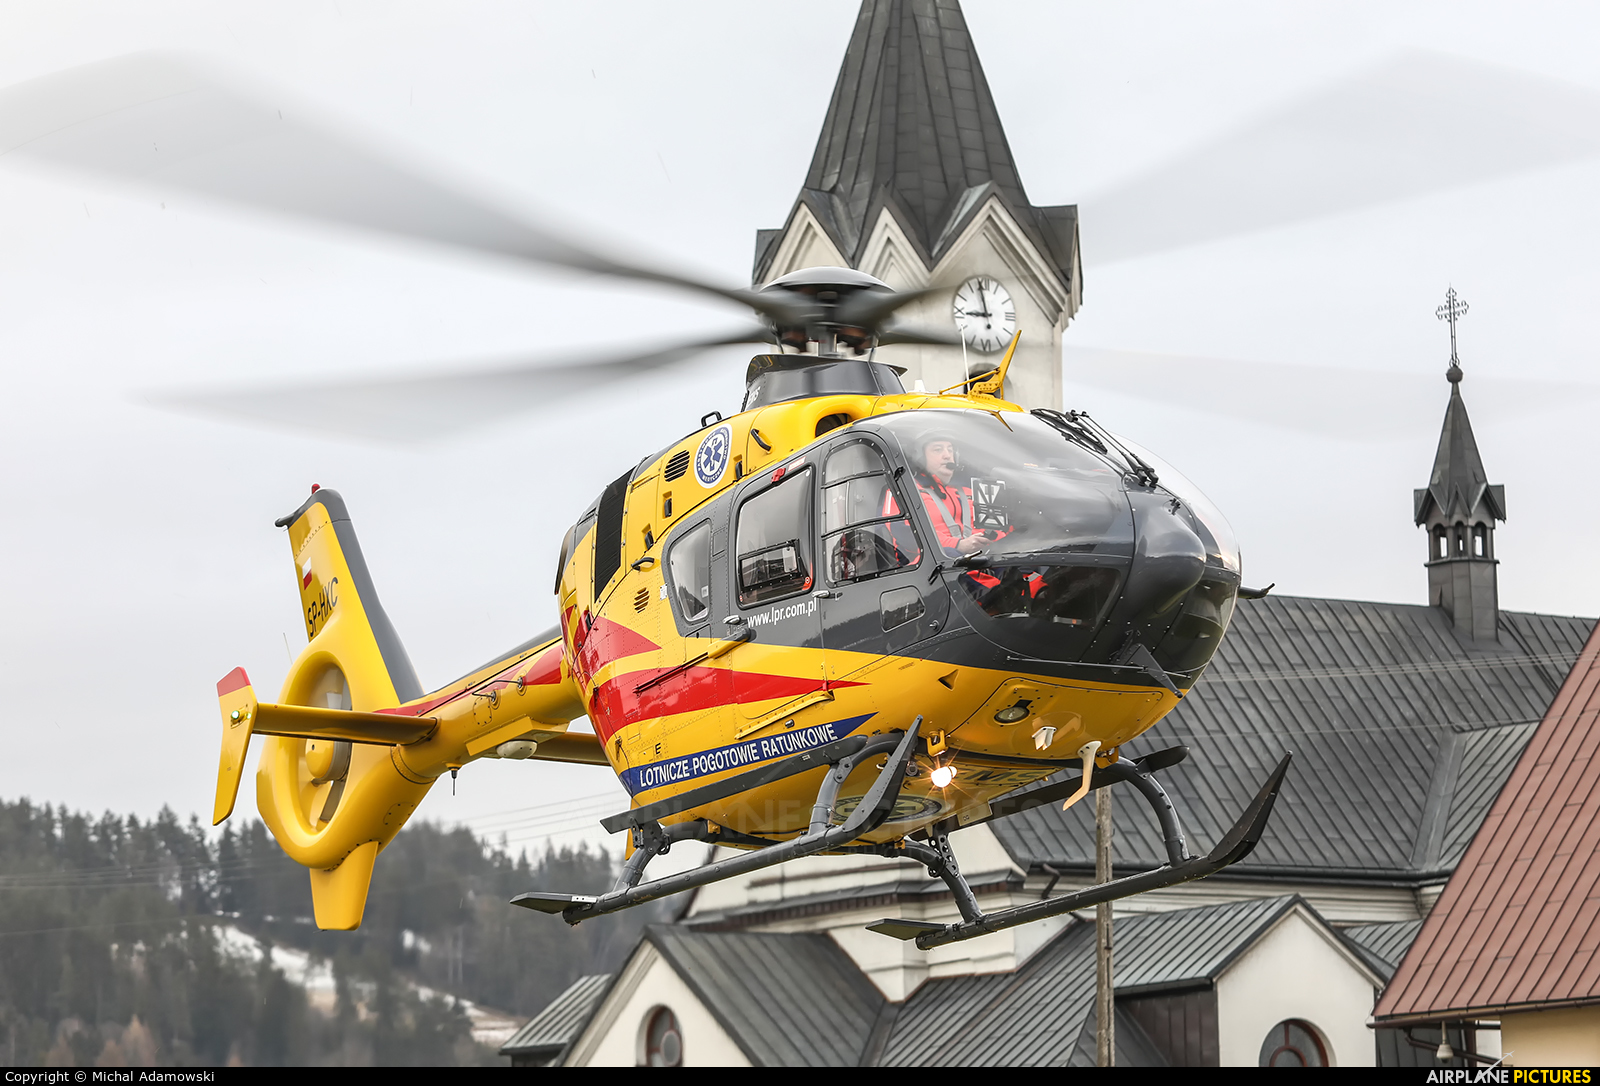 Polish Medical Air Rescue - Lotnicze Pogotowie Ratunkowe SP-HXC aircraft at Off Airport - Poland